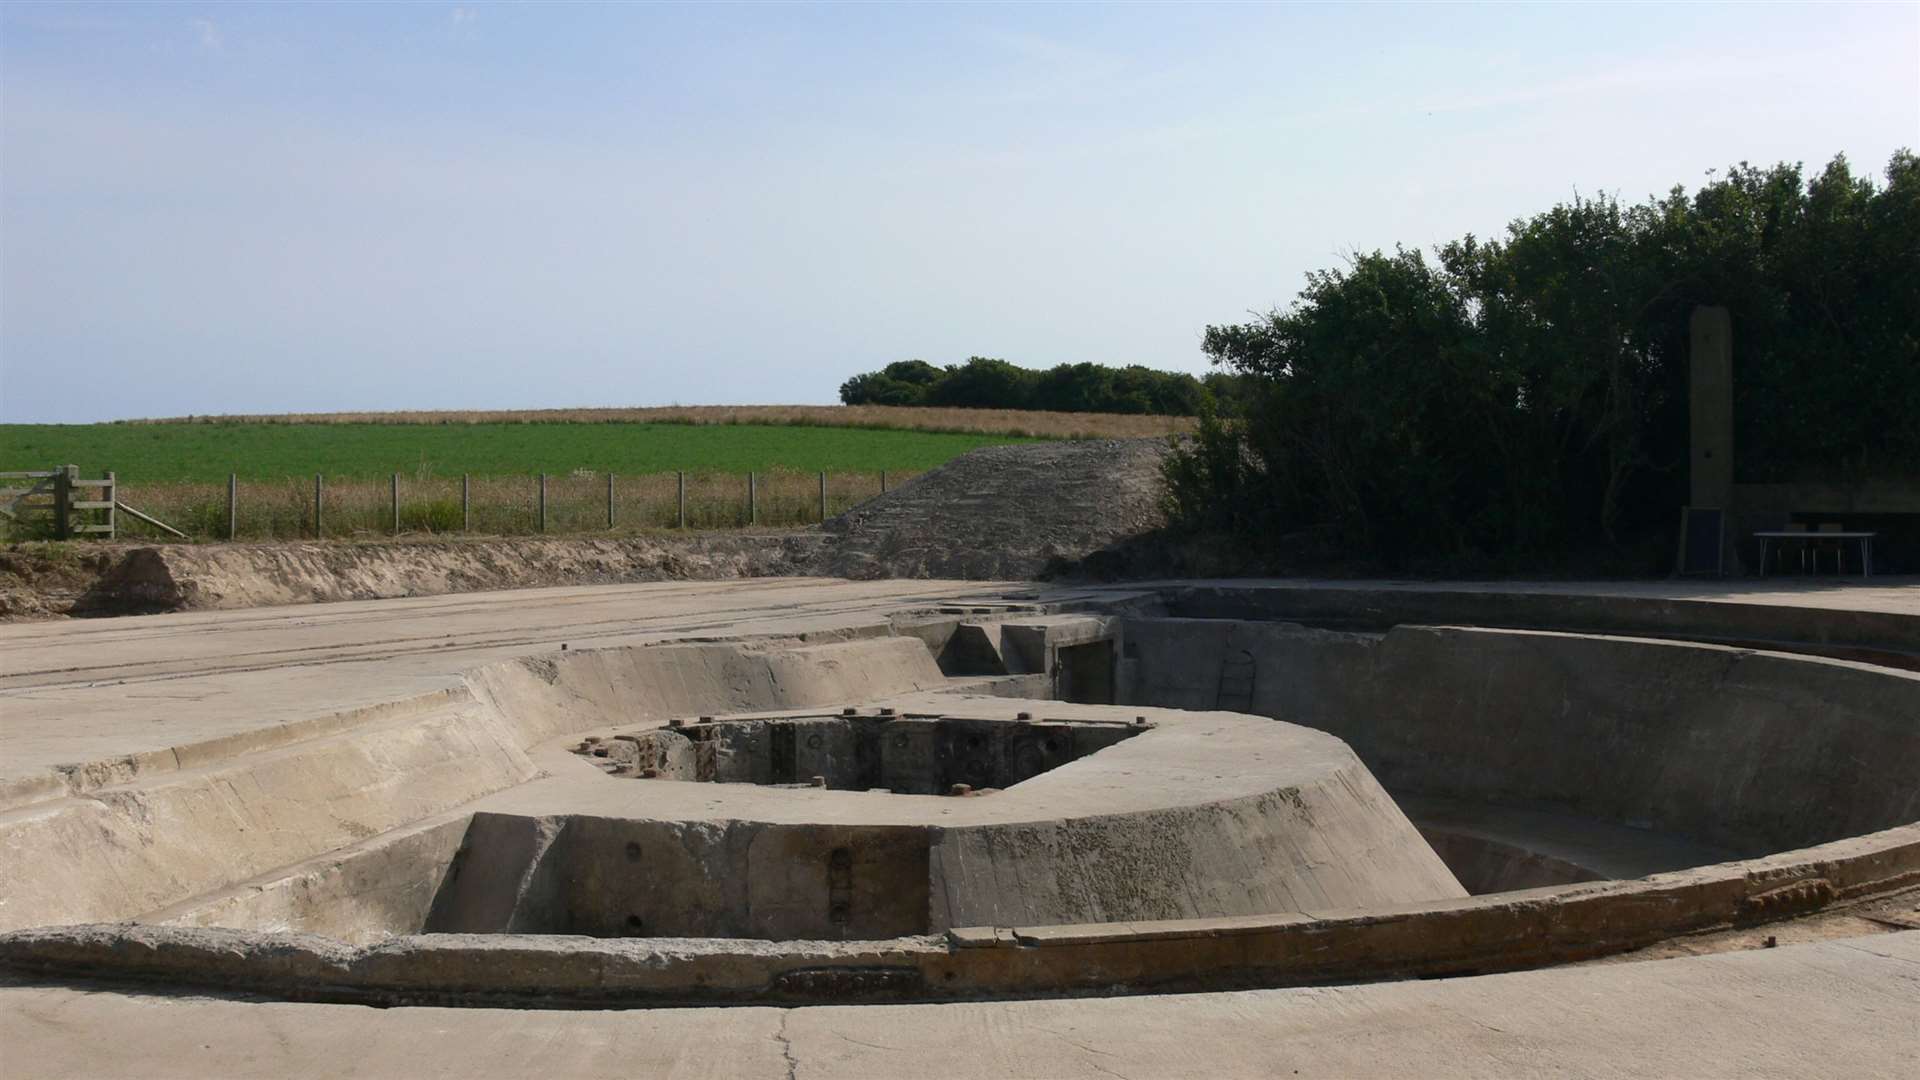 The project in Wanstone hopes to restore the Second World War artillery battery. Picture: National Trust / Gordon Wise